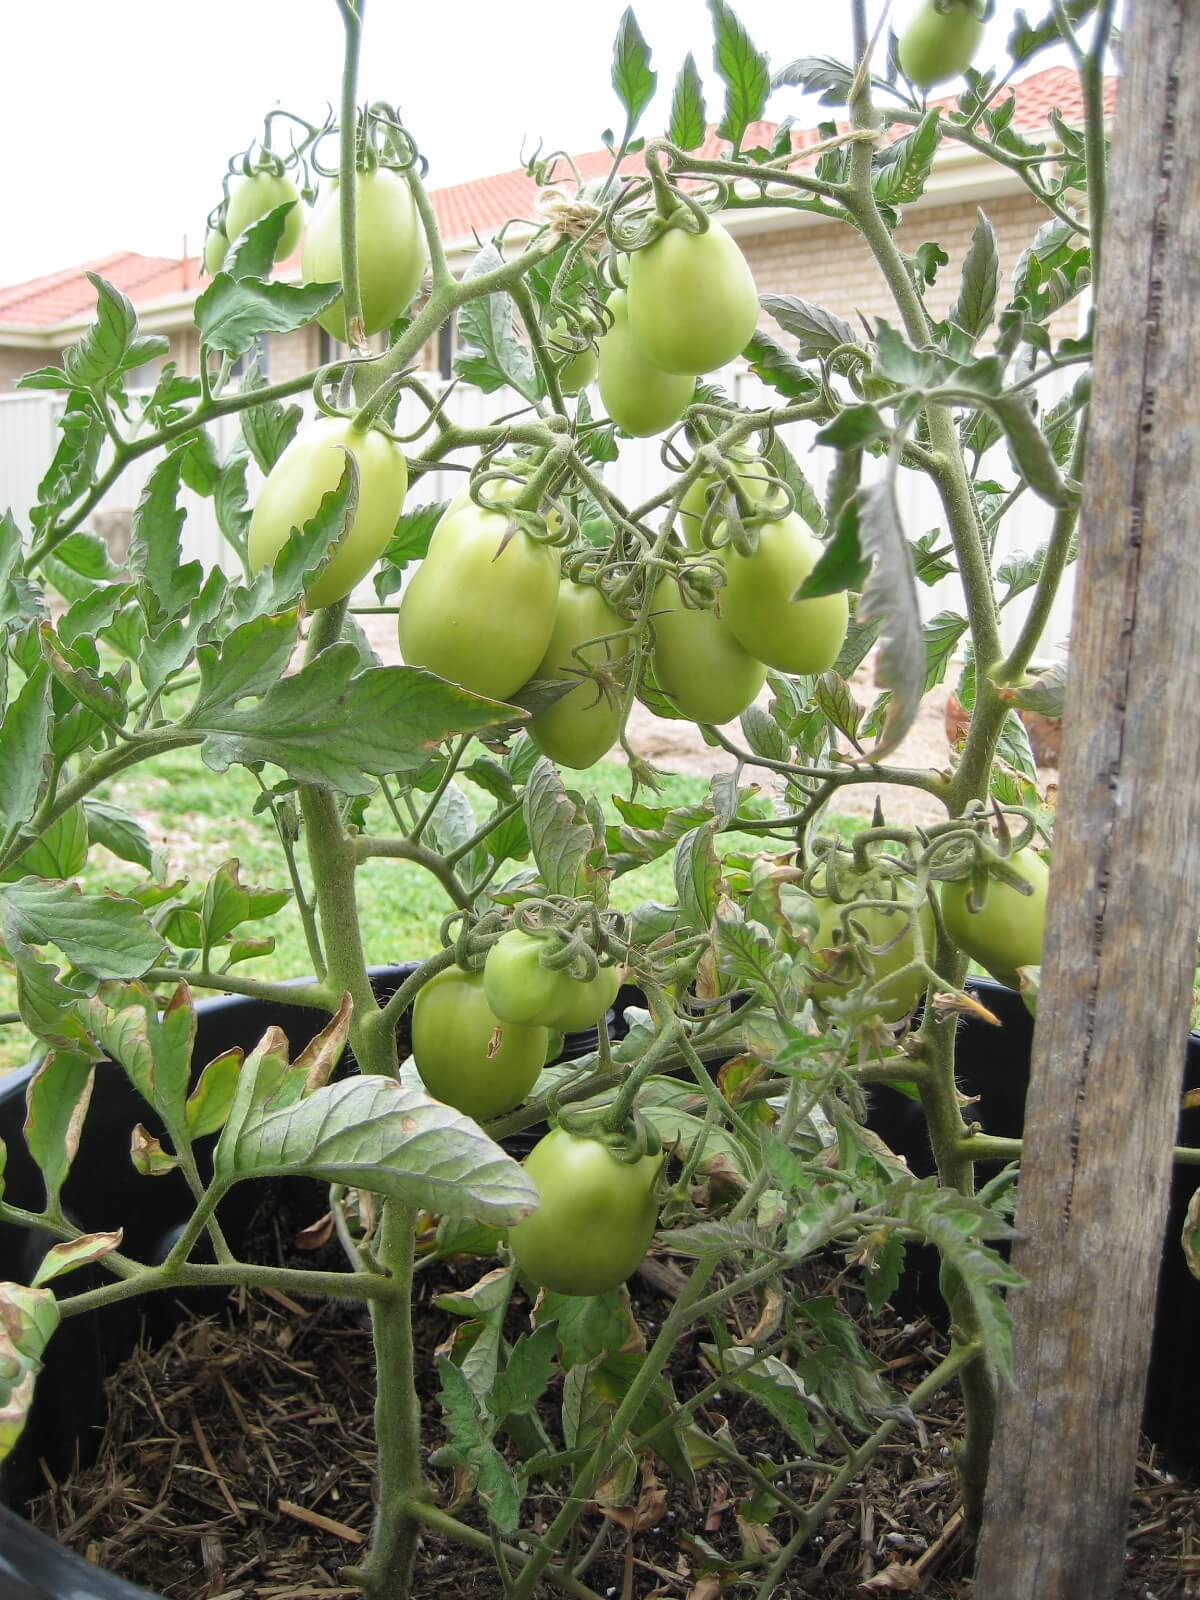 You are currently viewing Tomato Growing In Self-Watering Buckets